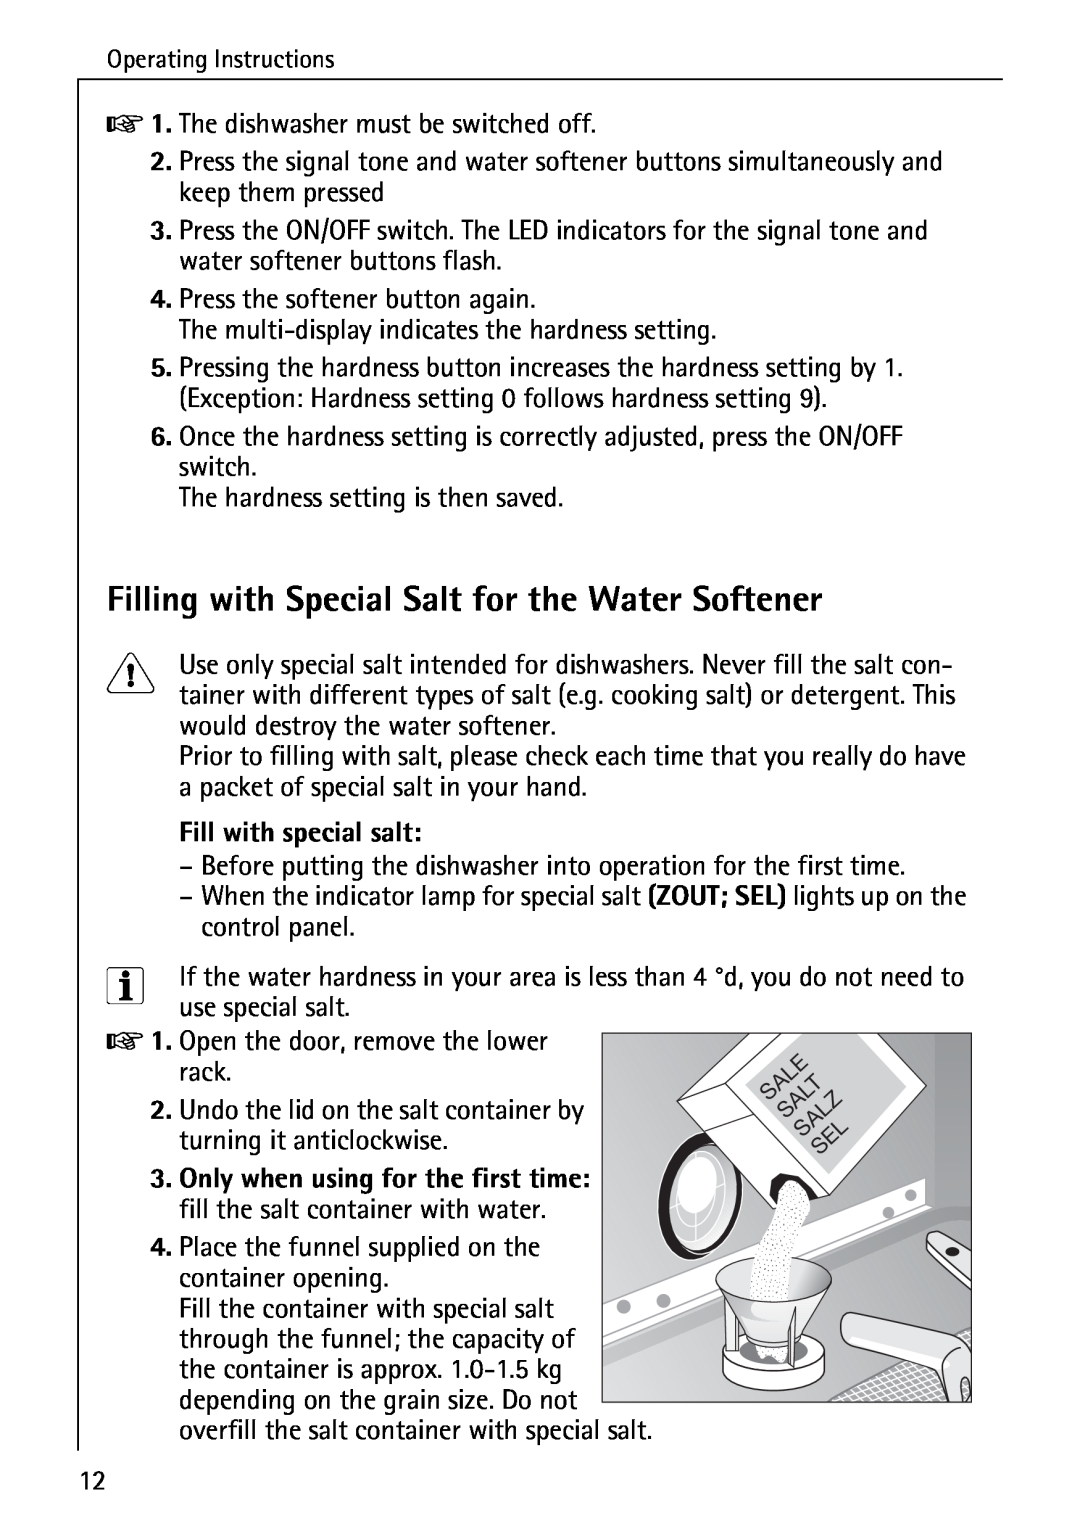 AEG 80800 manual Filling with Special Salt for the Water Softener, Fill with special salt 